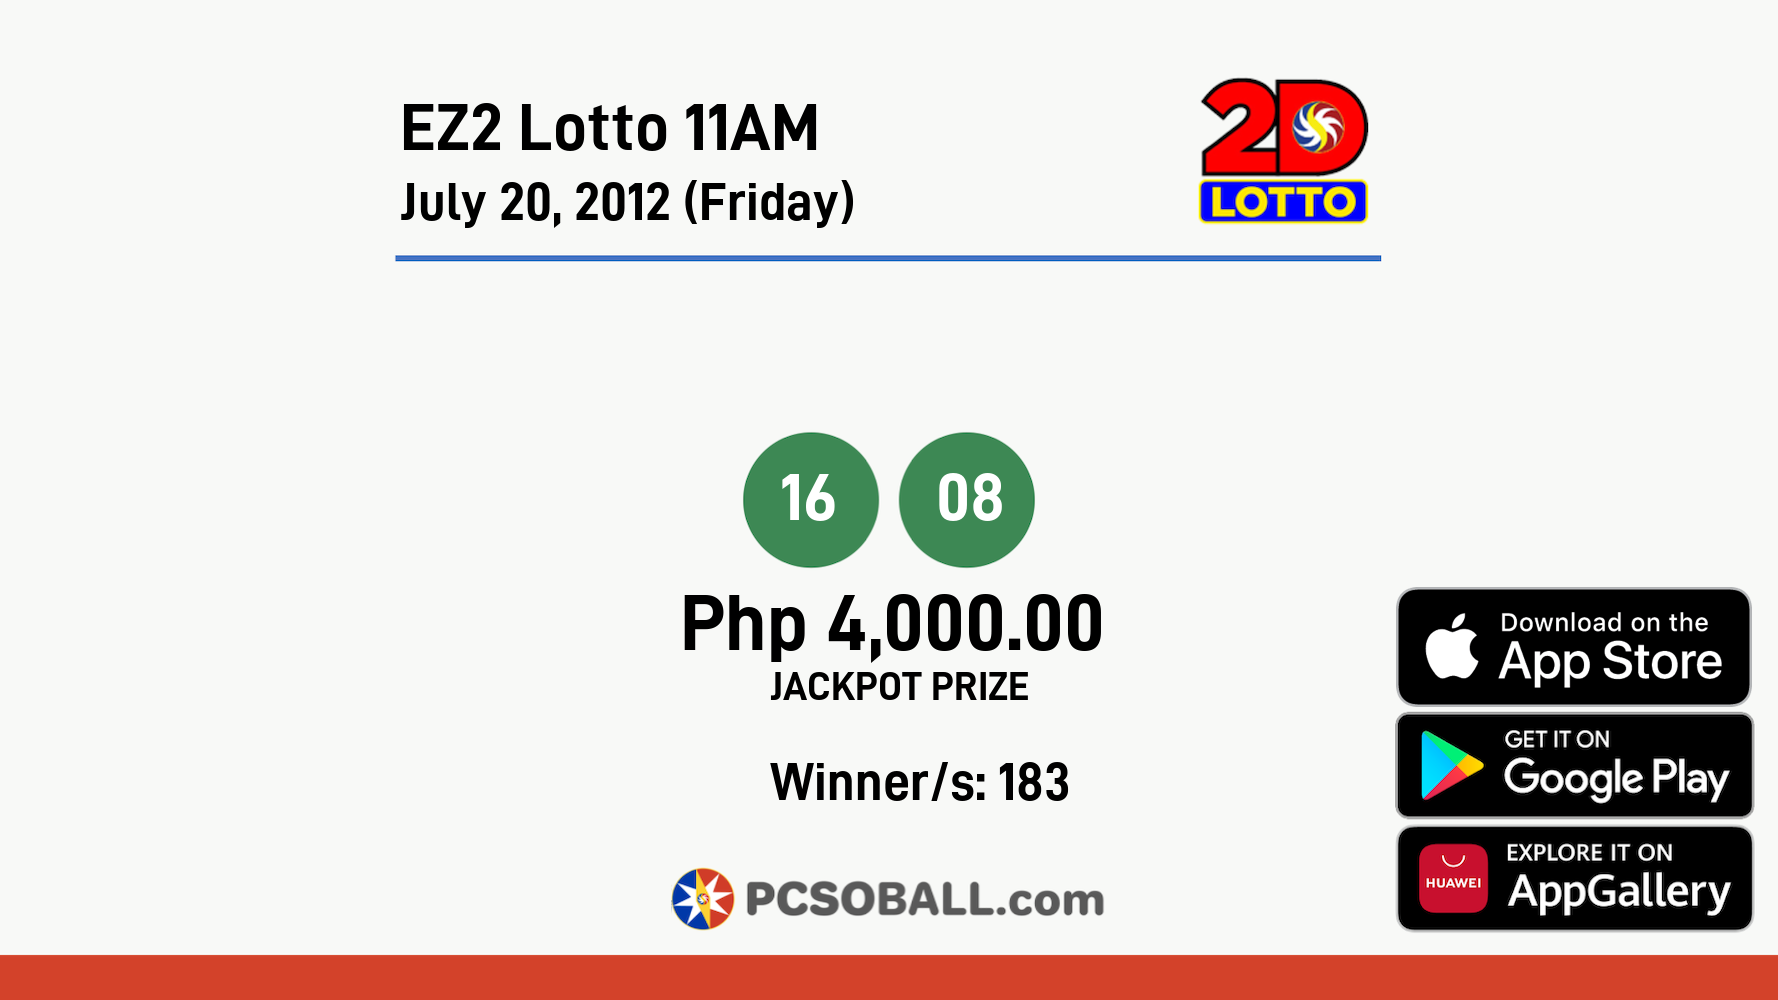 EZ2 Lotto 11AM July 20, 2012 (Friday) Result